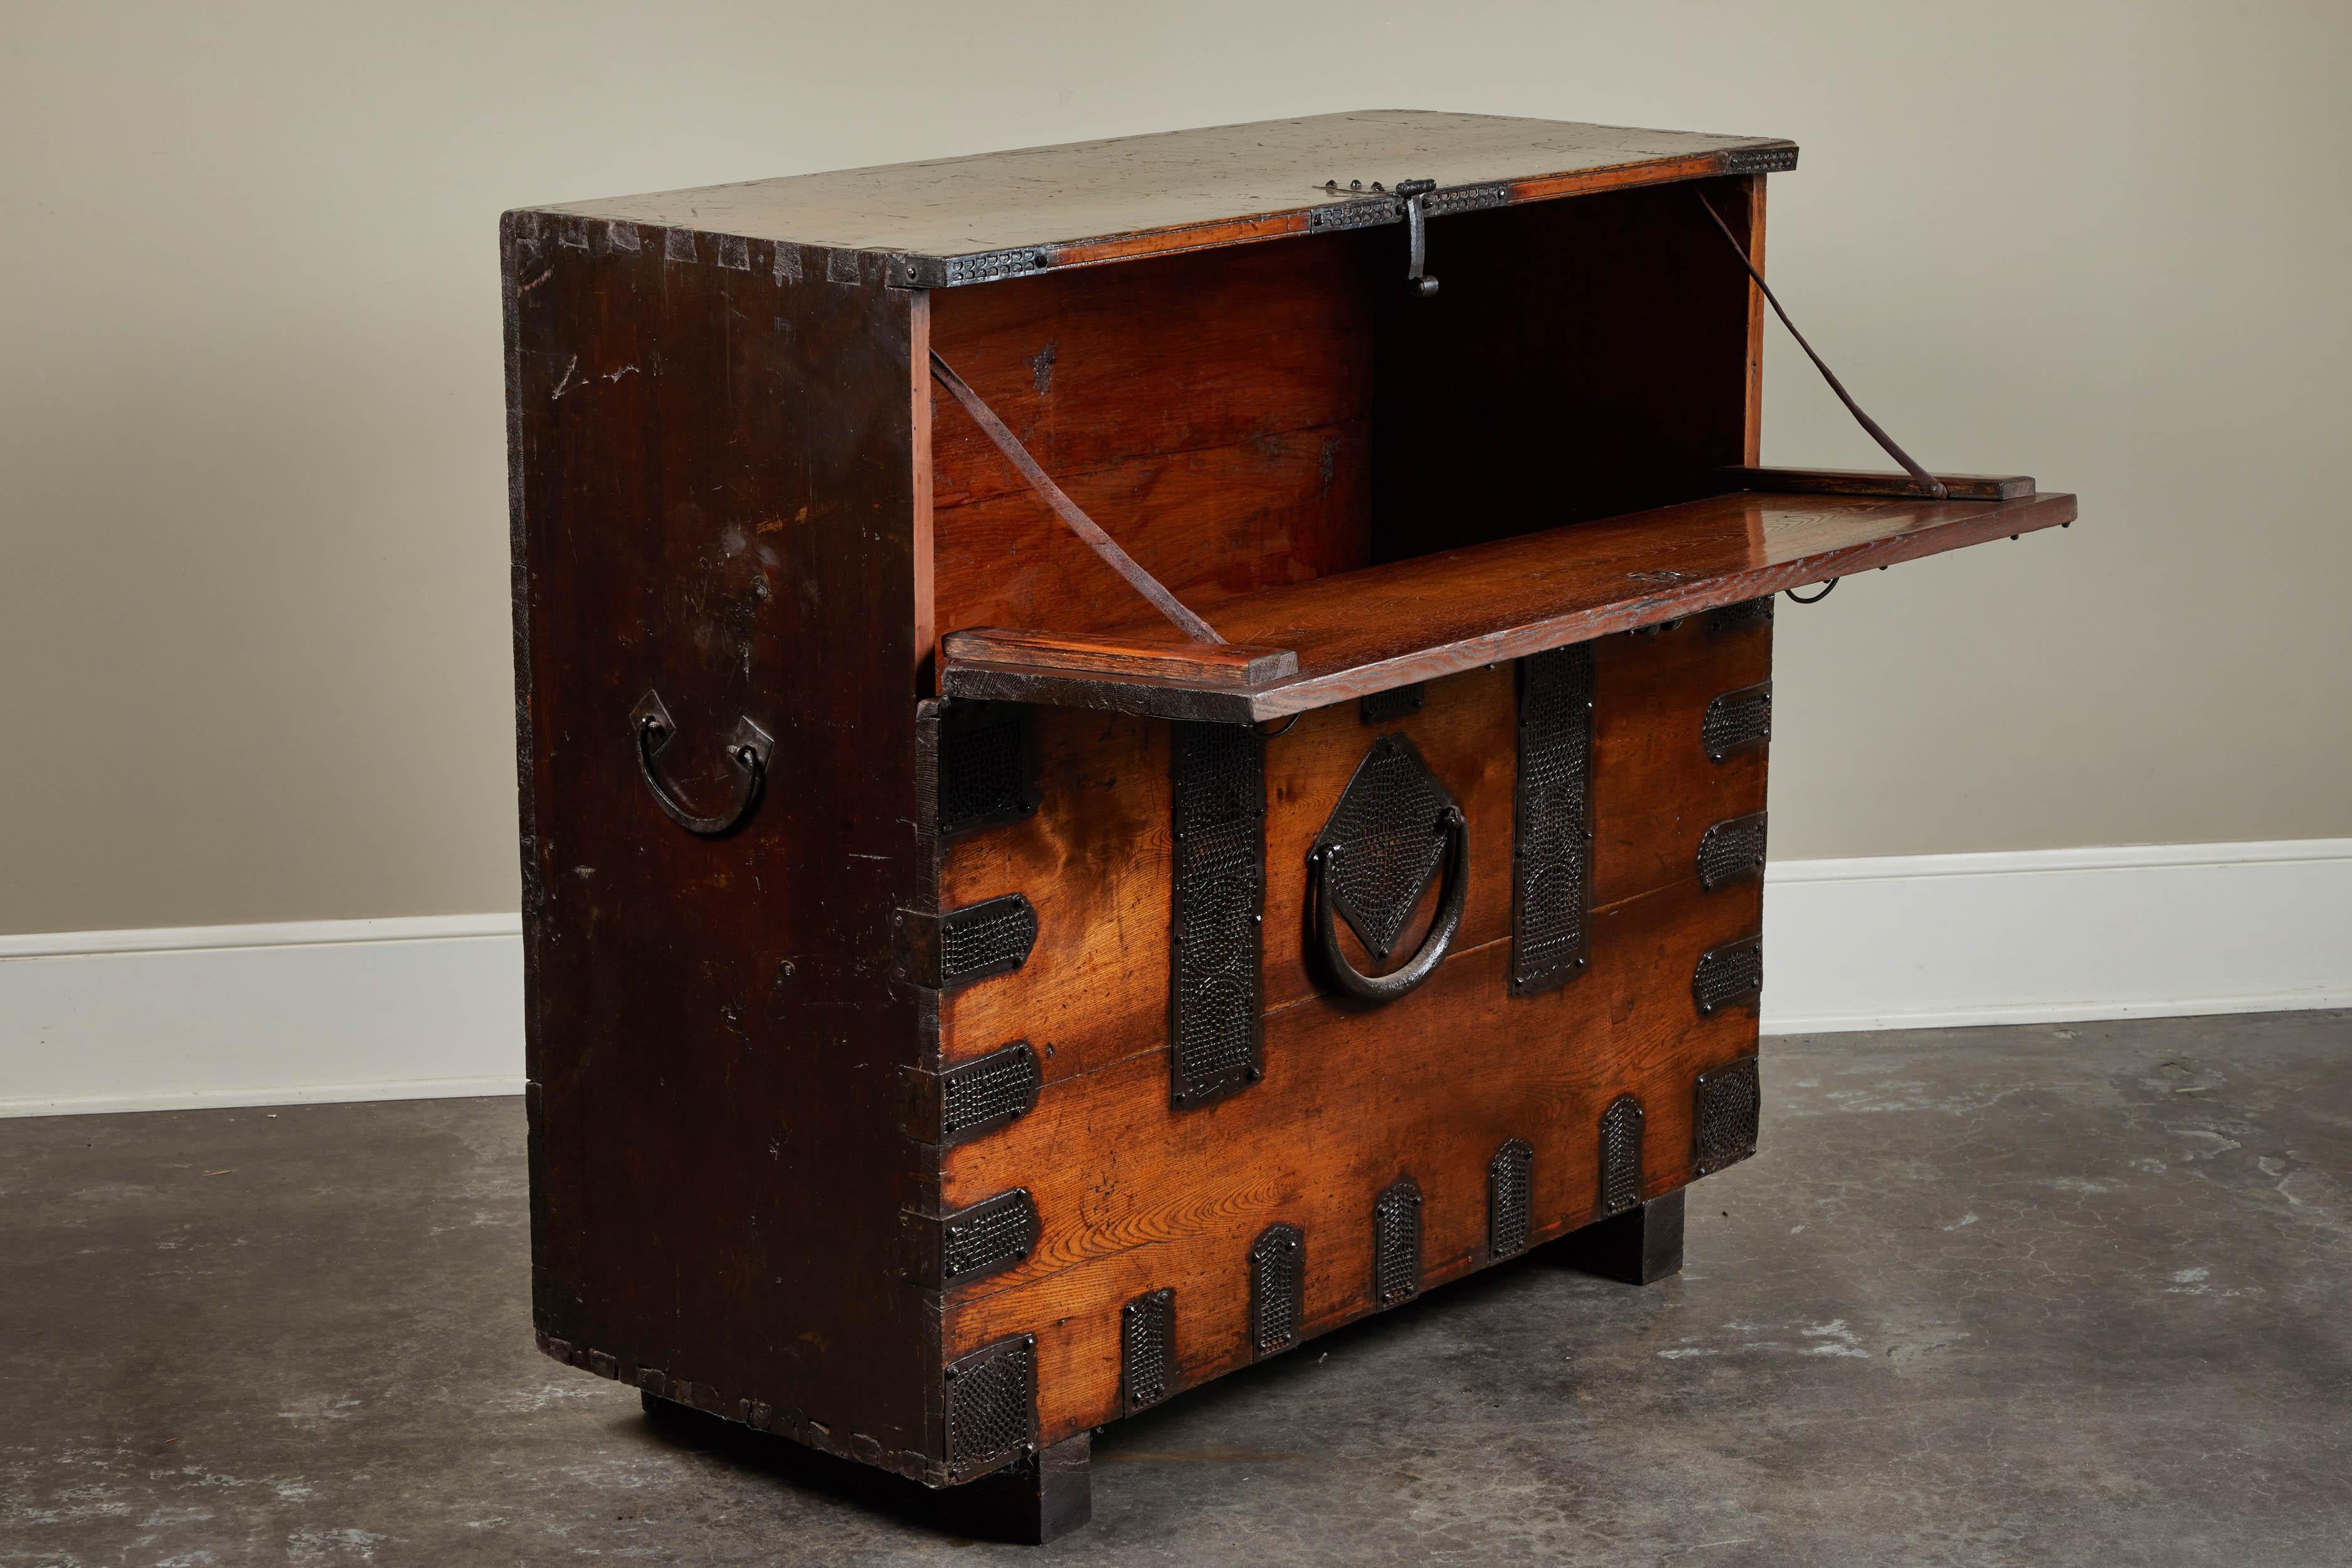 Rare 19th century Korean chest. Unusual size makes chest a rare piece. Beautiful iron hardware decorate the face and lid of the chest. One of two, not quite a pair. Sold individually.